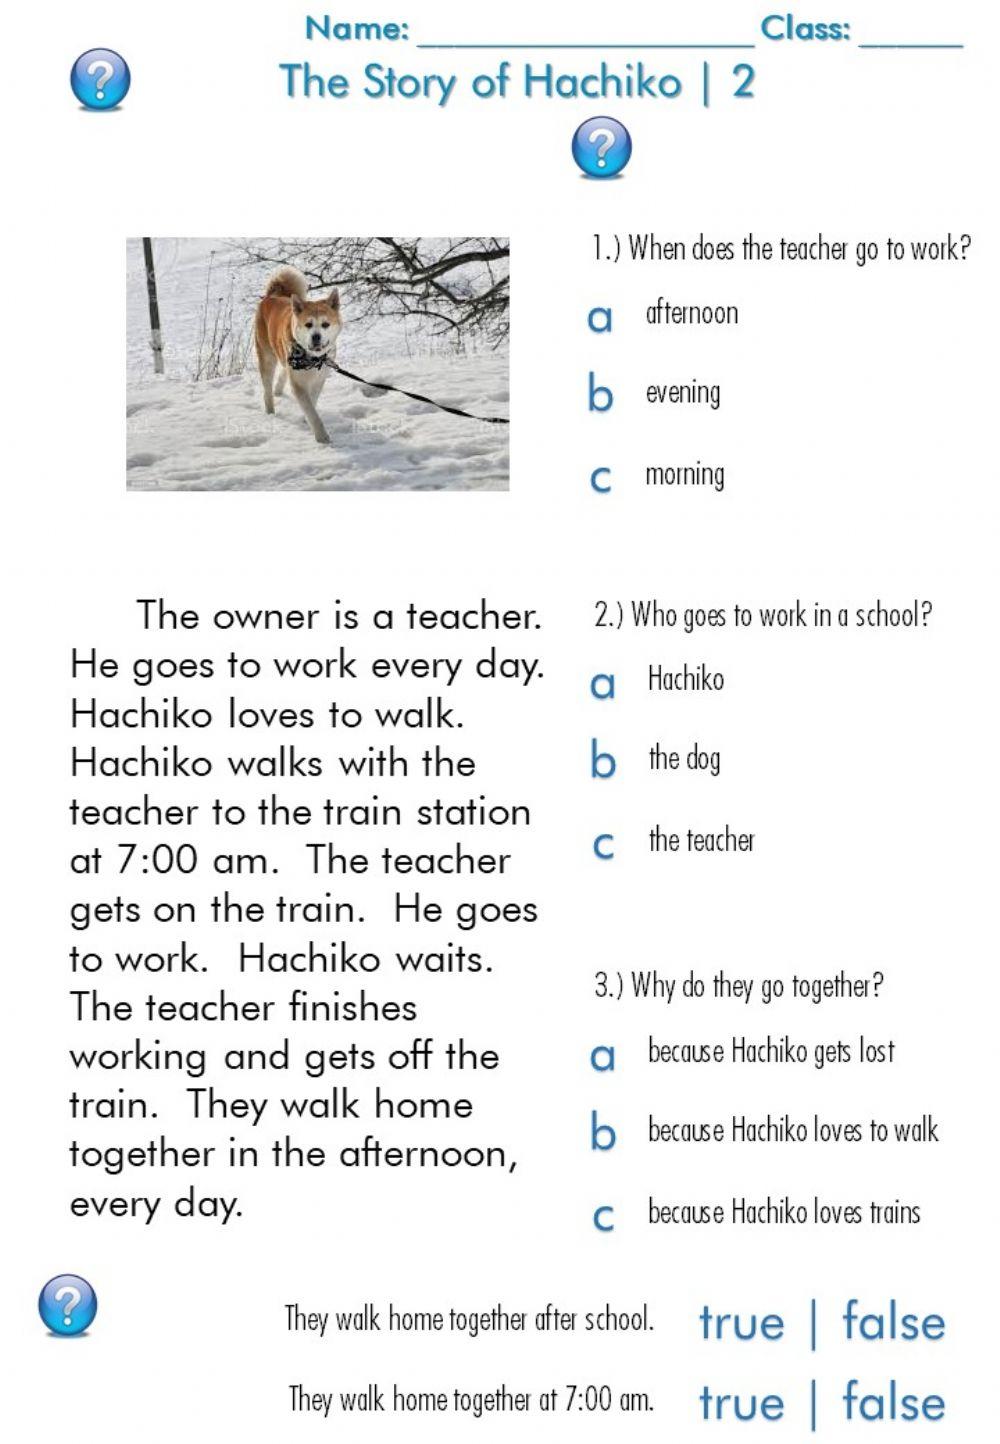 The Story of Hachiko 2